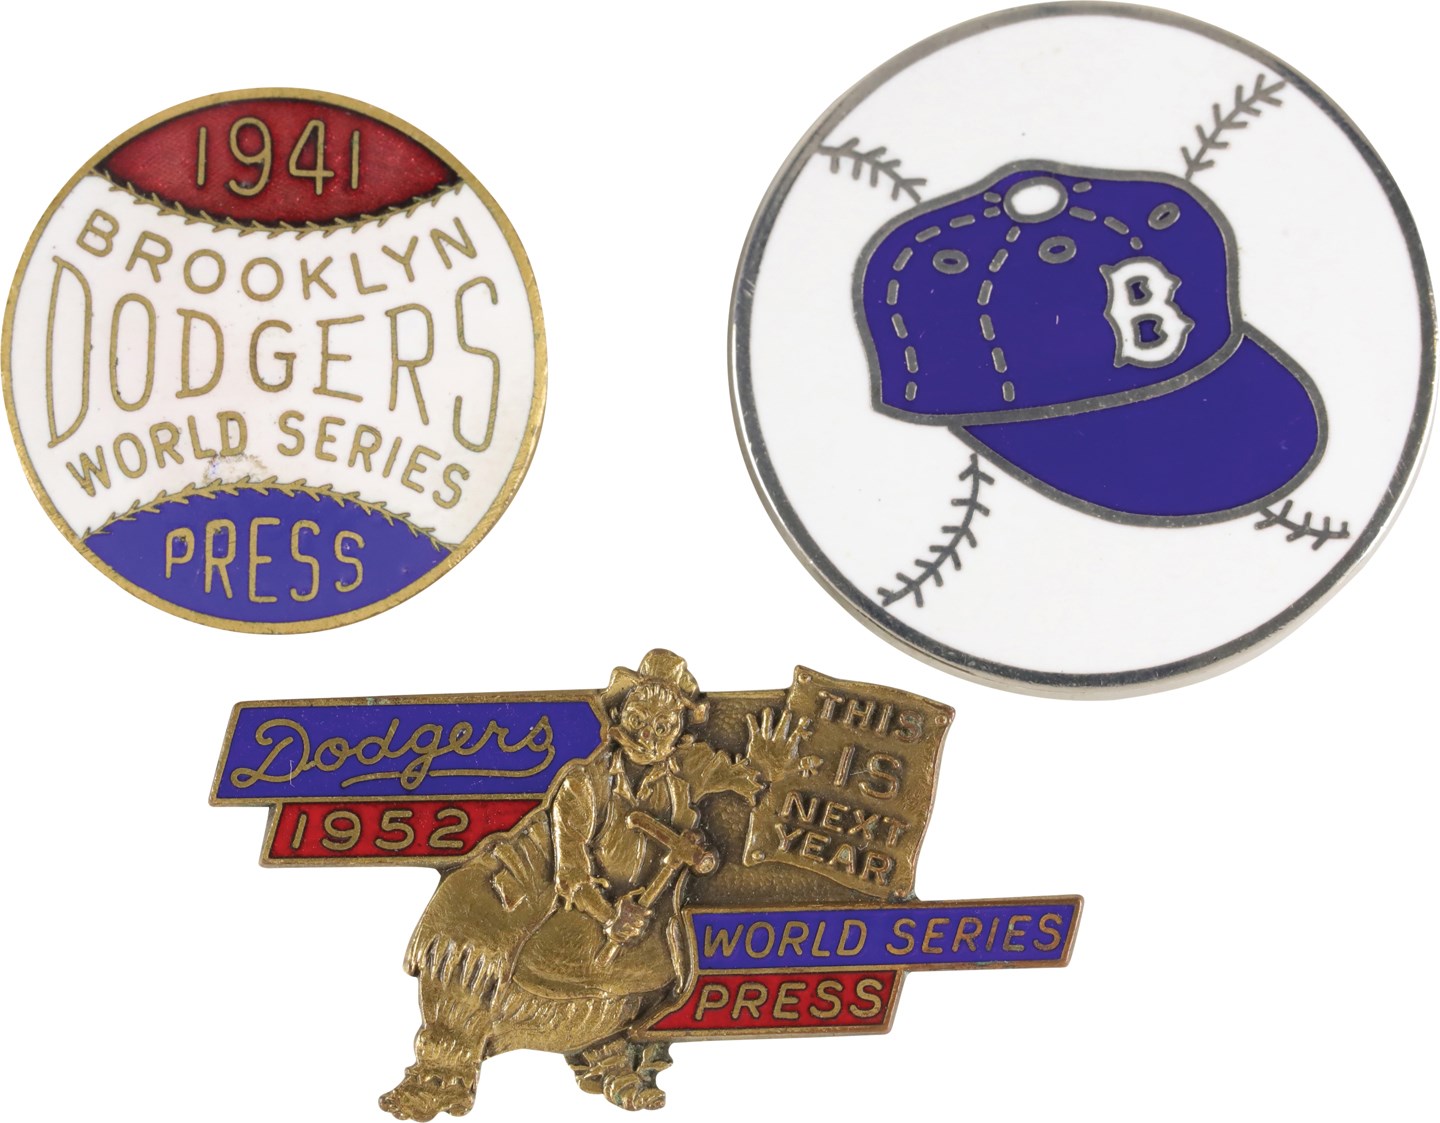 - 1941-1955 Brooklyn Dodgers World Series Press Pin Collection (3)